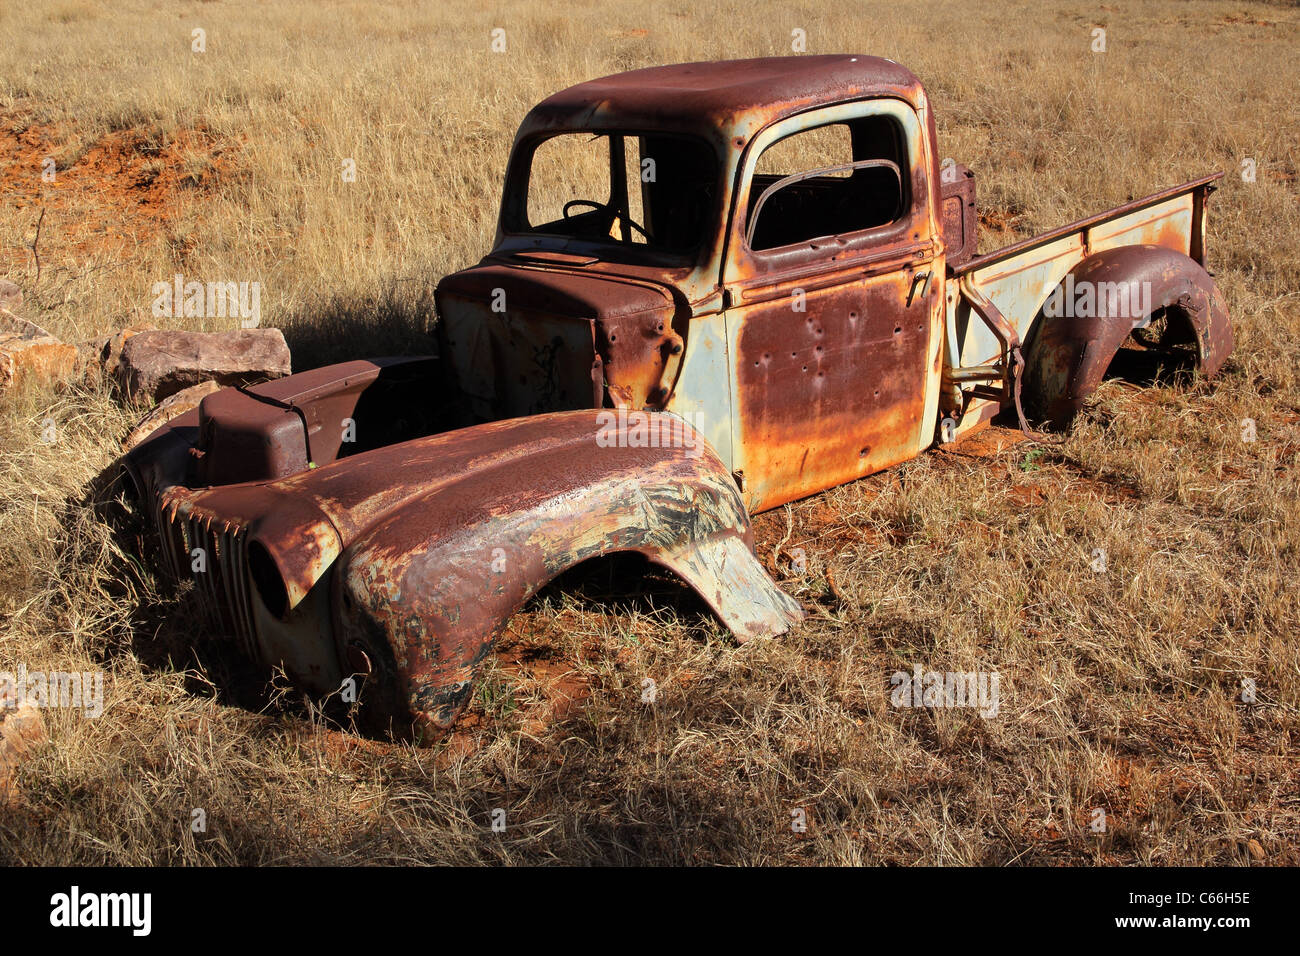 Wreck of a rusty old pickup truck out in the field Stock Photo